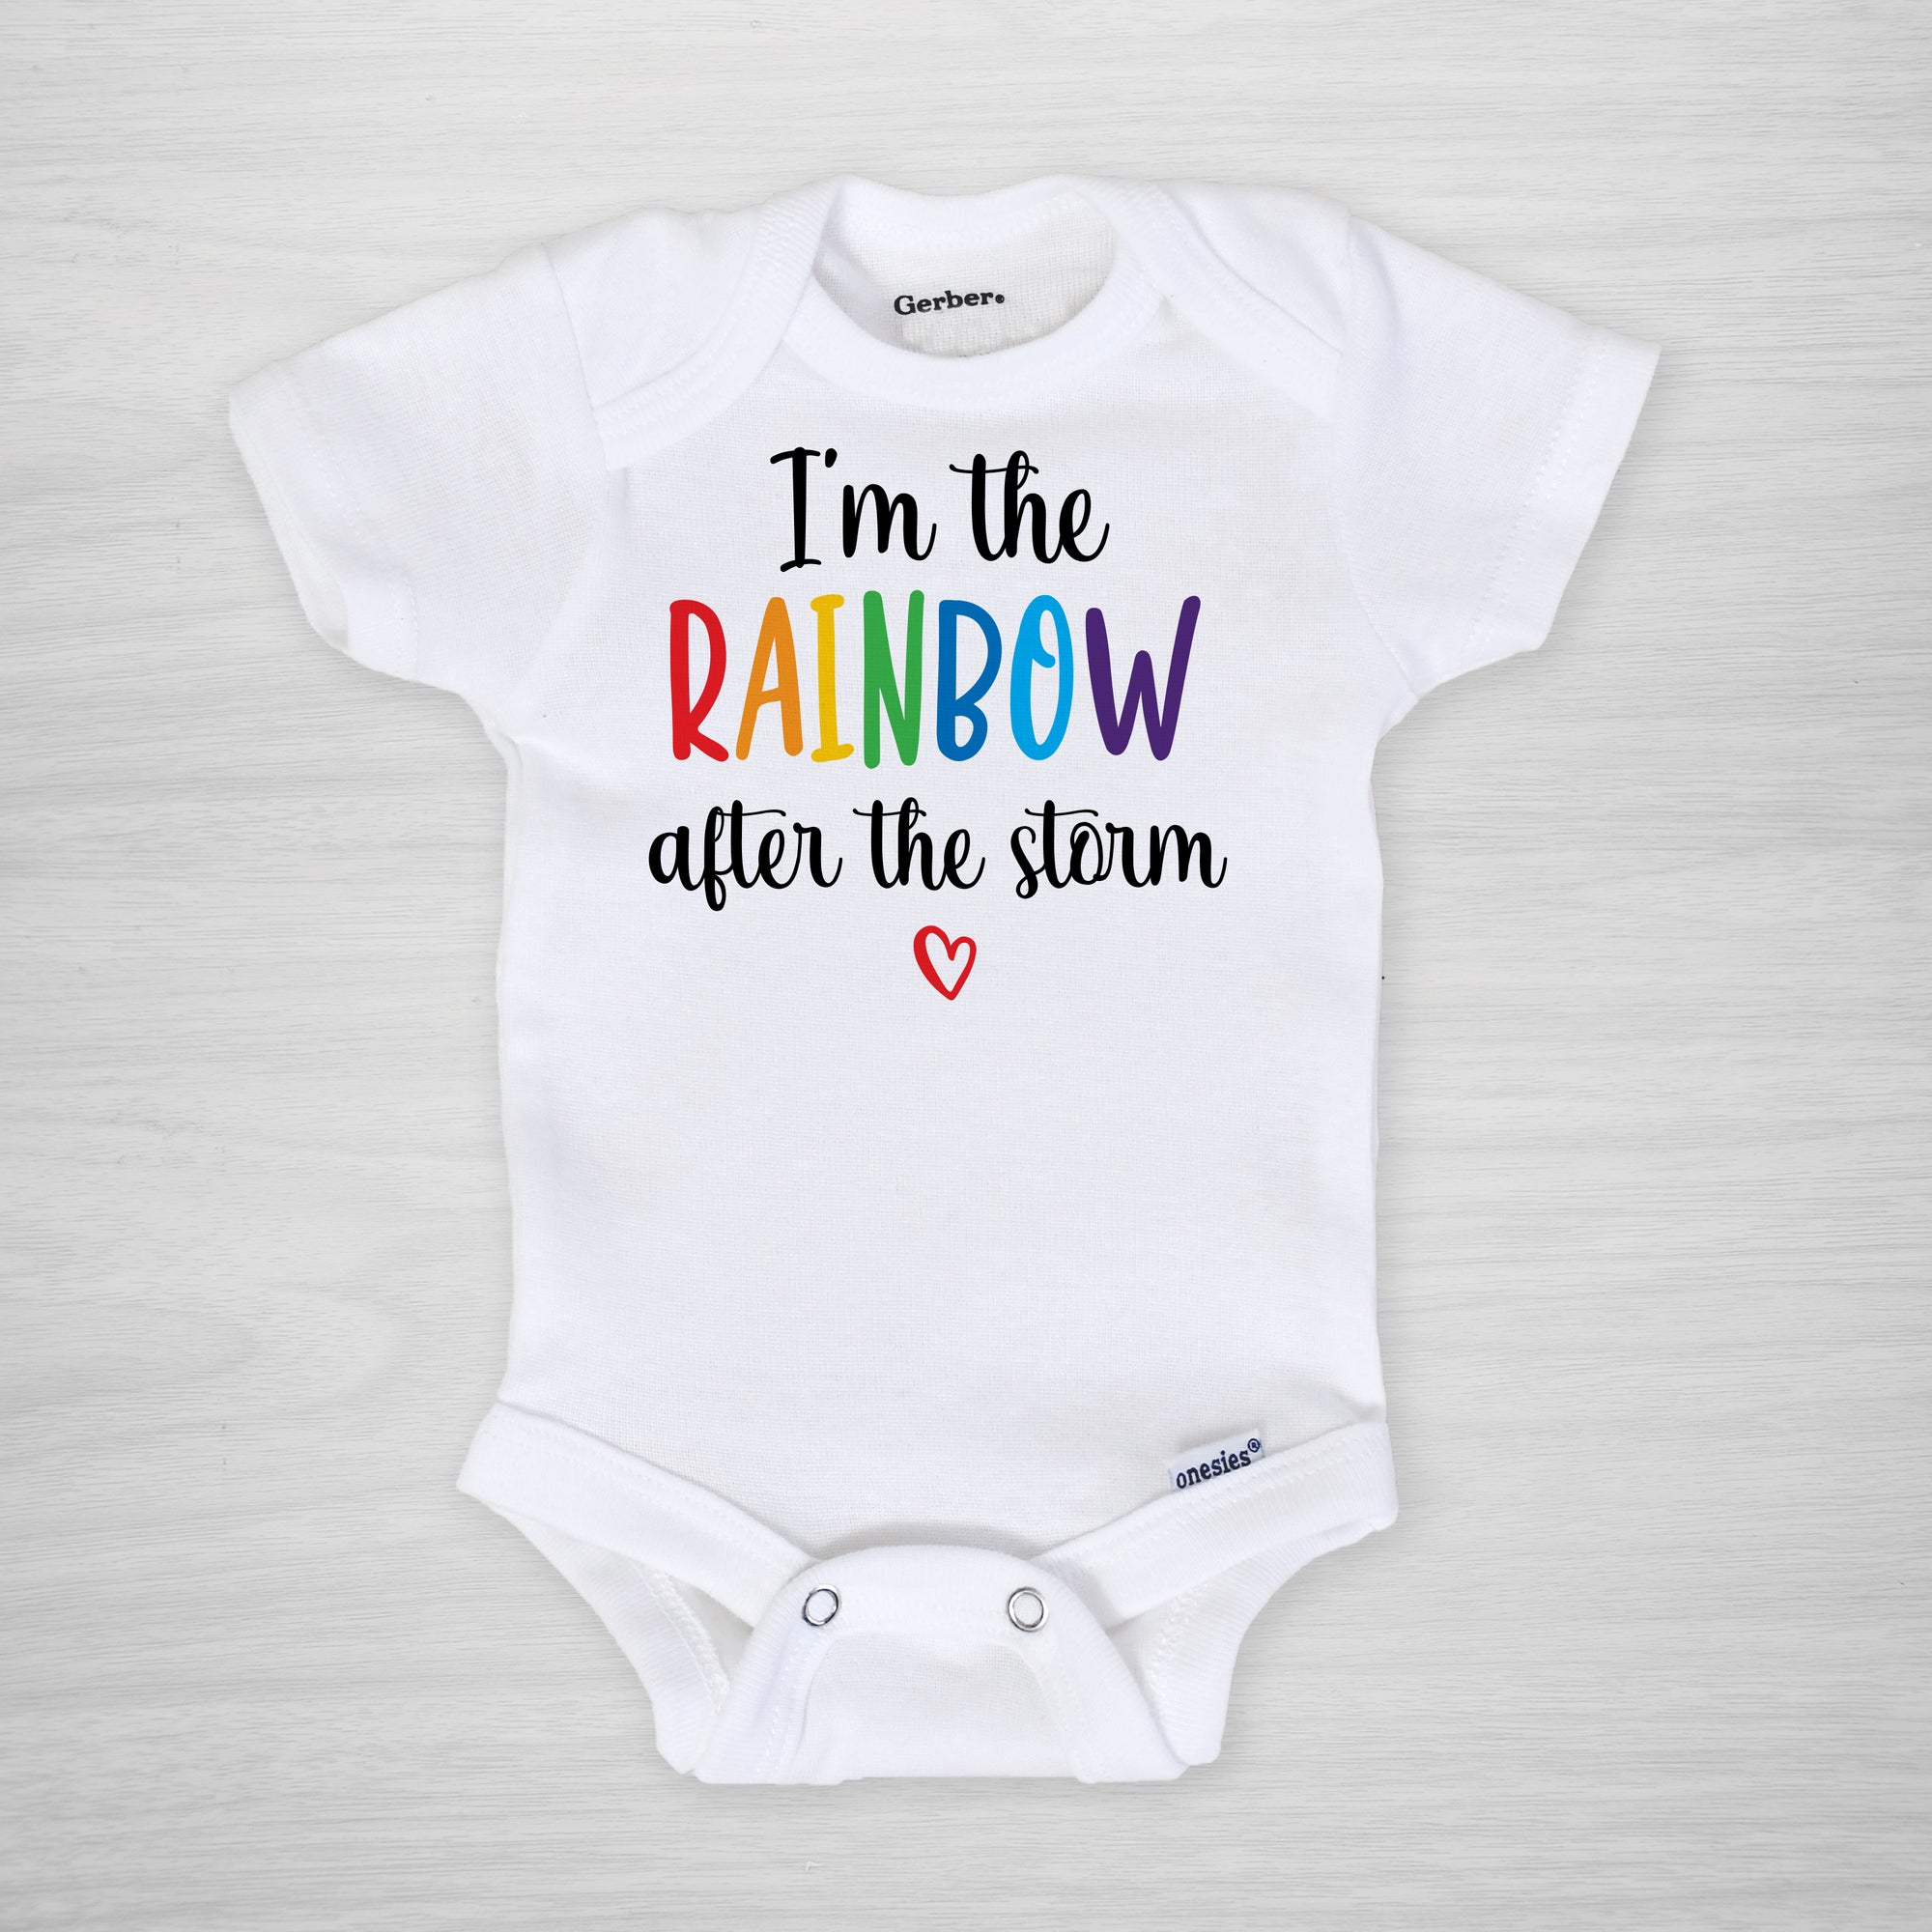 I am the rainbow after the storm personalized onesie, short sleeved